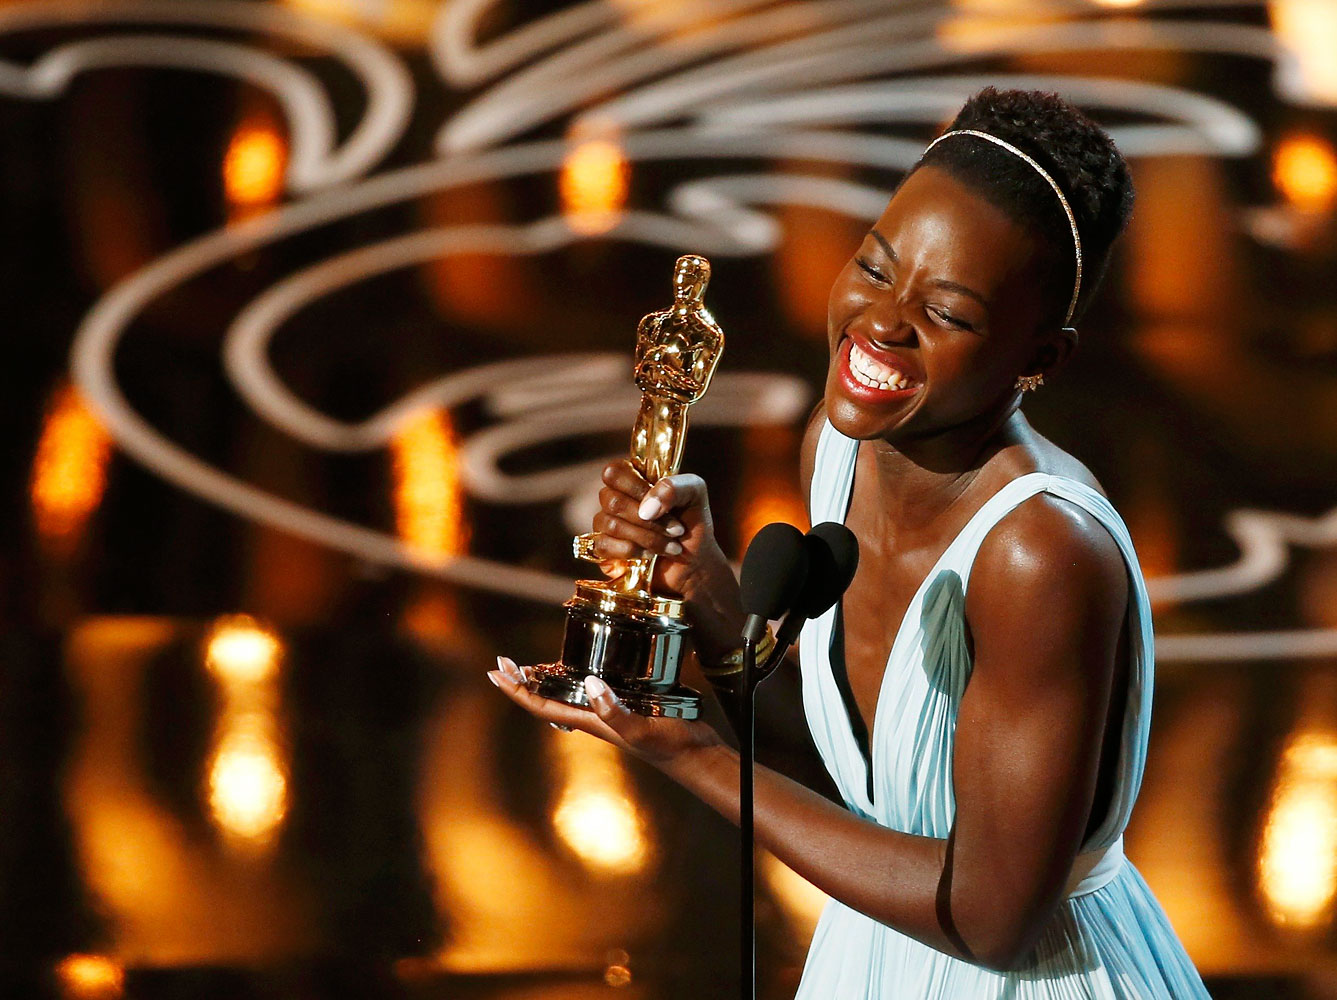 Lupita Nyong'o, best supporting actress winner for her role in "12 Years a Slave", speaks on stage at the 86th Academy Awards in Hollywood, California March 2, 2014.